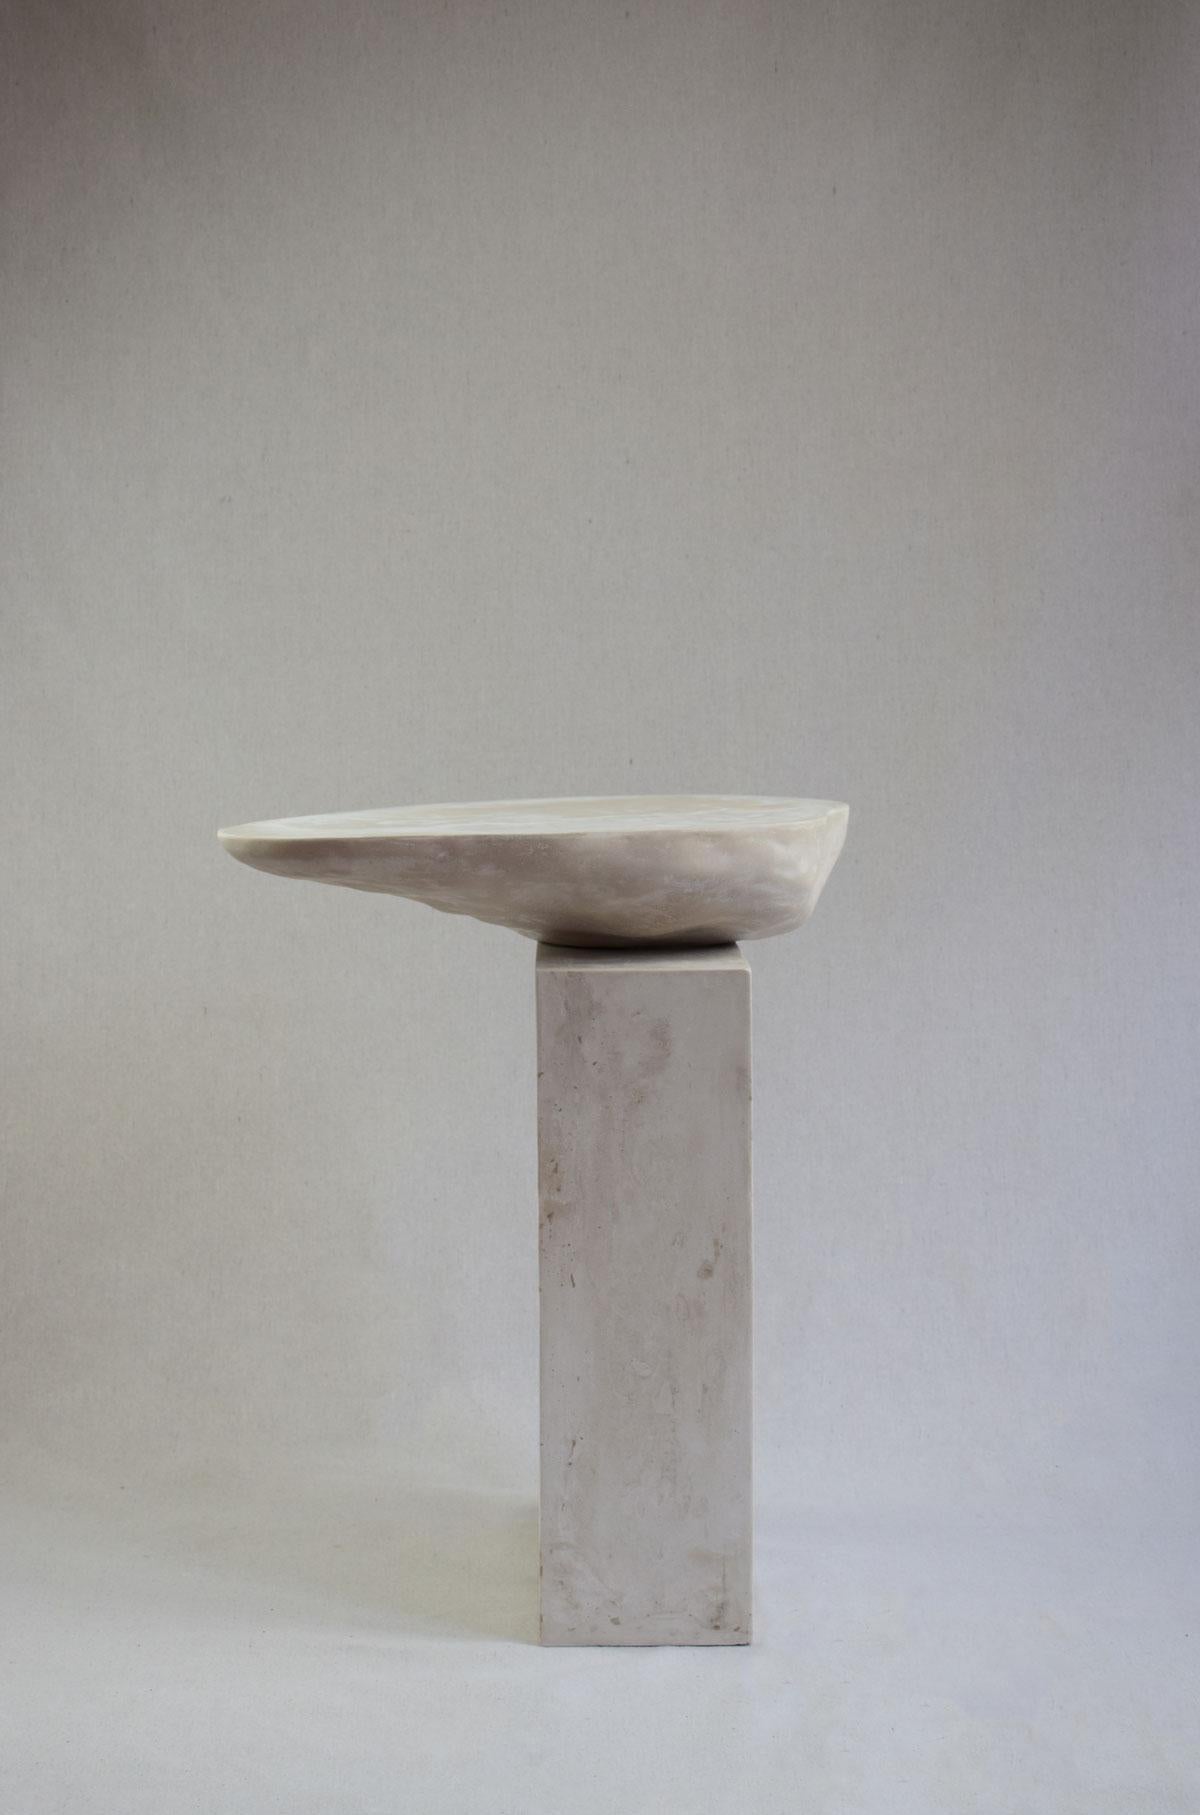 Unis Table by Isac Elam Kaid
Edition 2 of 5
Signed and numbered
Dimensions: Cast stone, gypsum, wax finish
Materials: 52 cm H x 41 D x 38 W
29 kg

